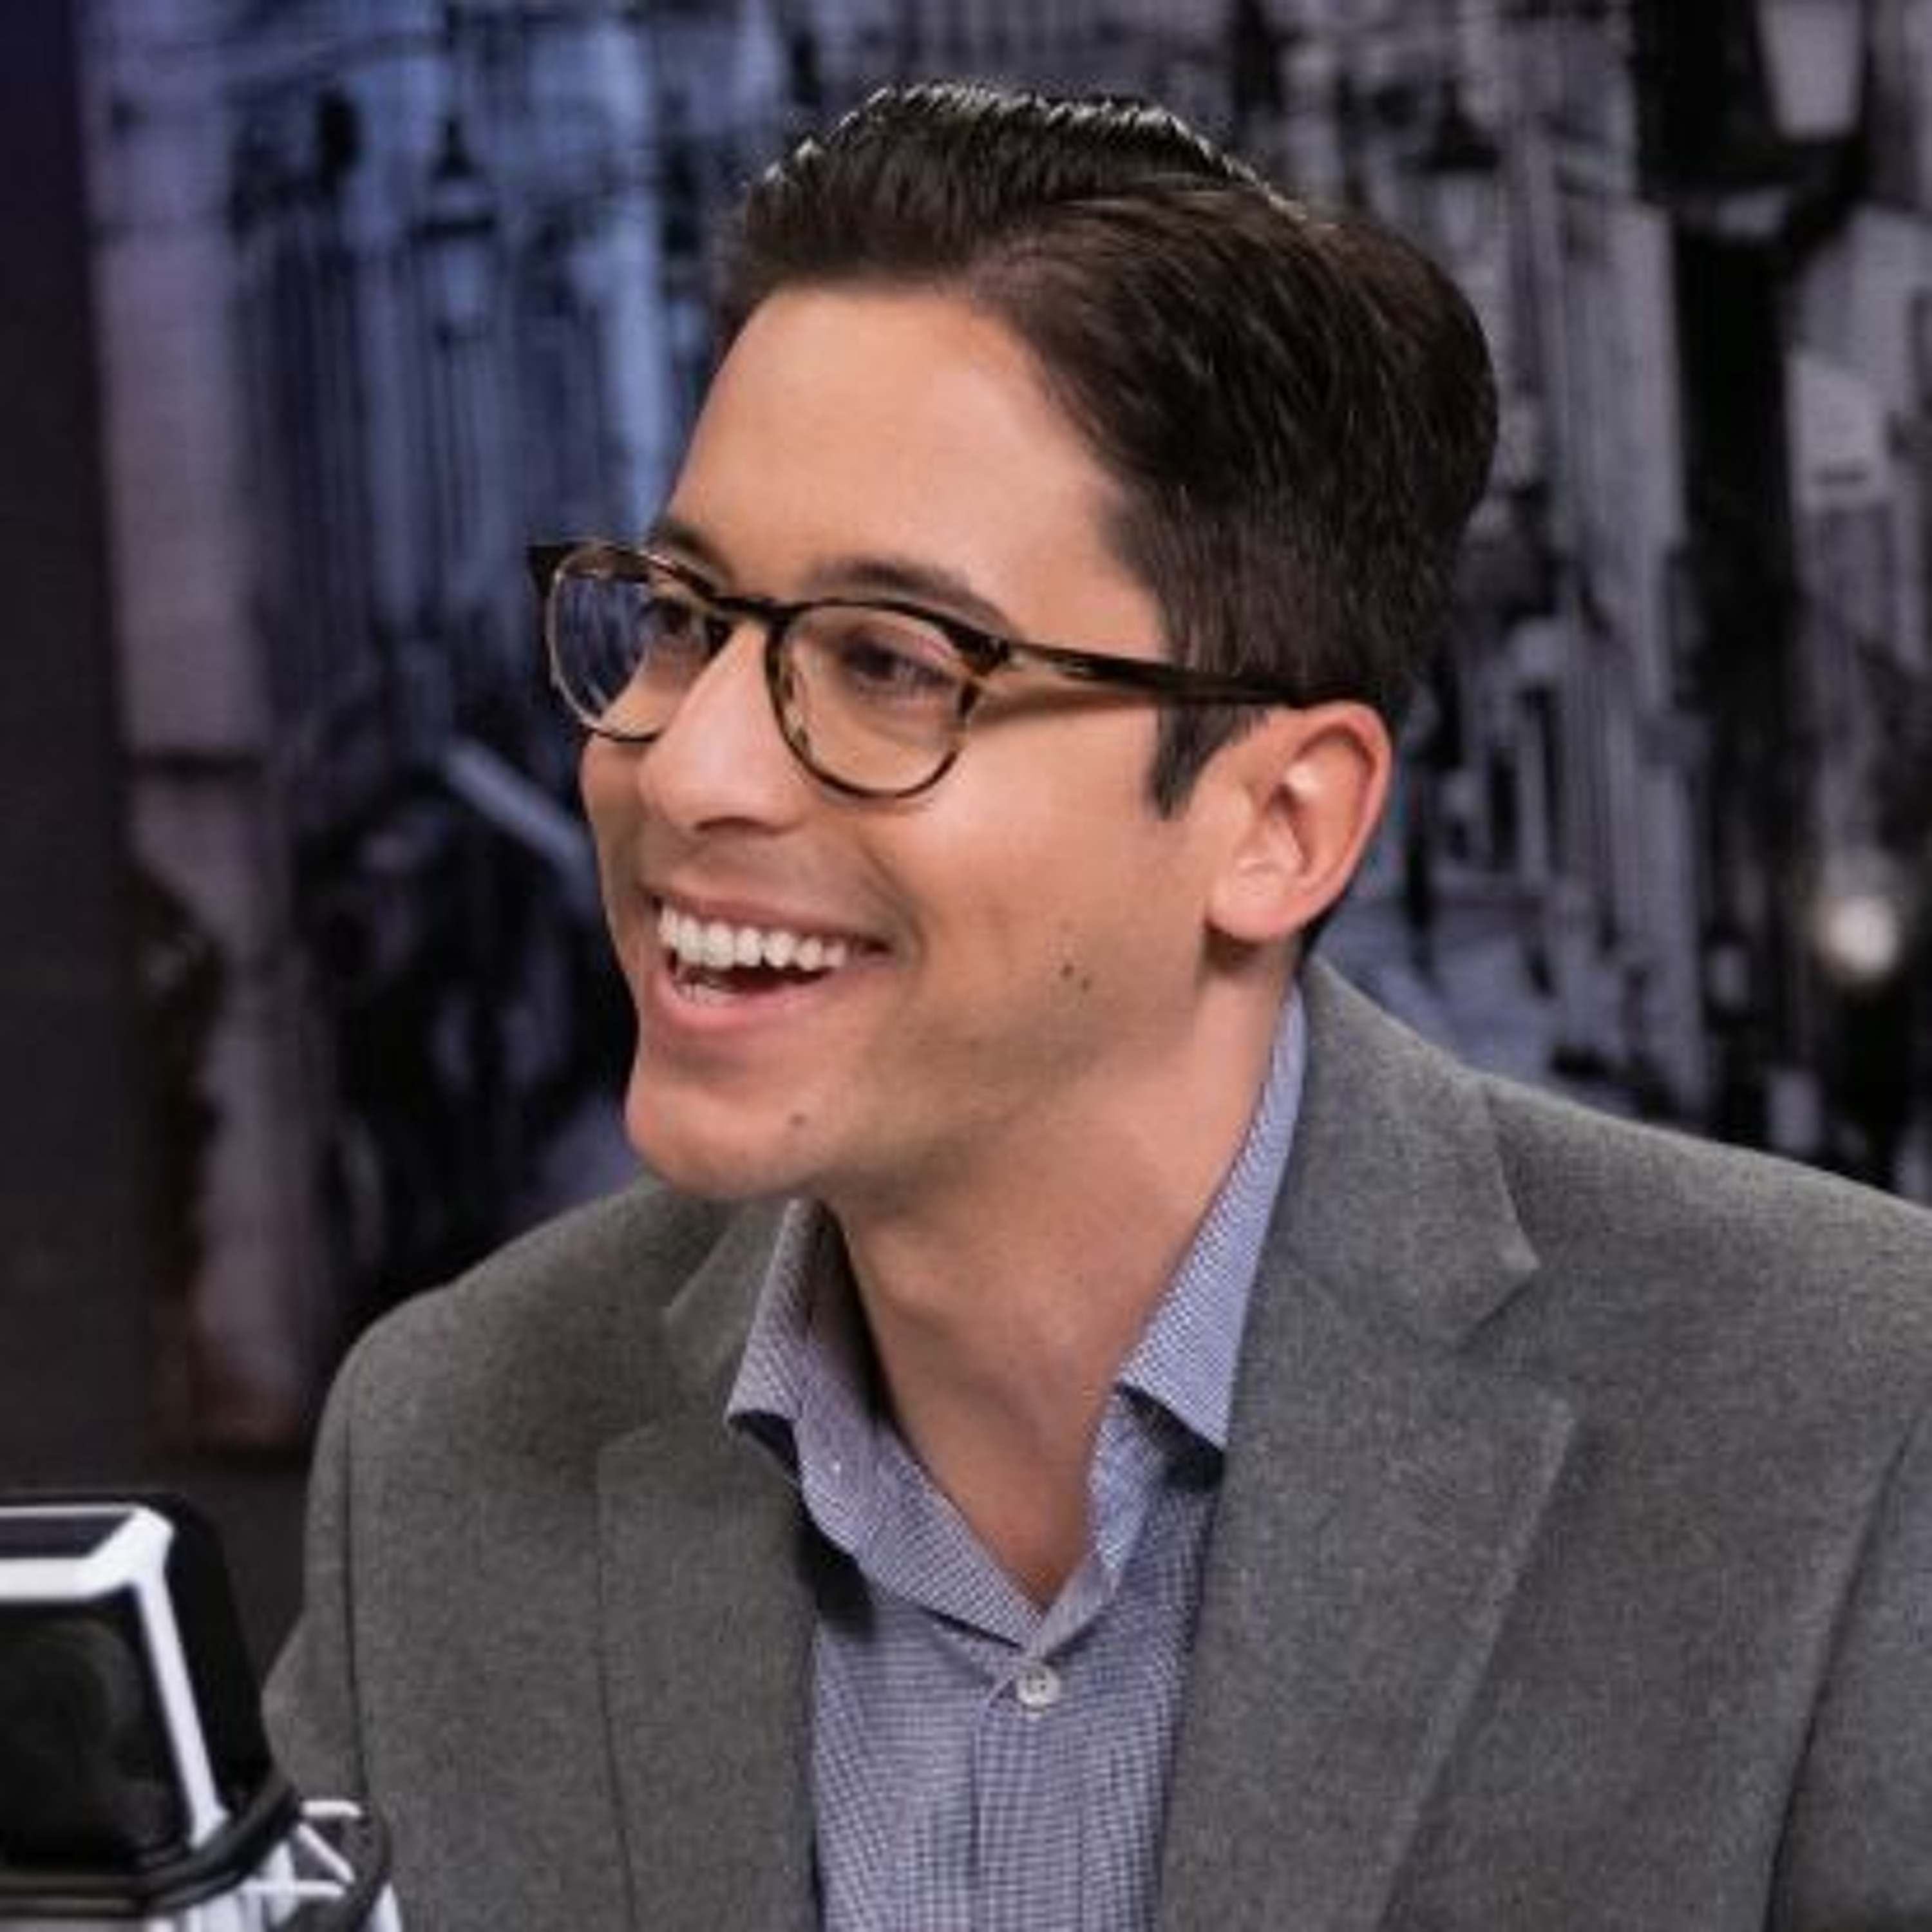 The Candace Owens Show: Michael Knowles